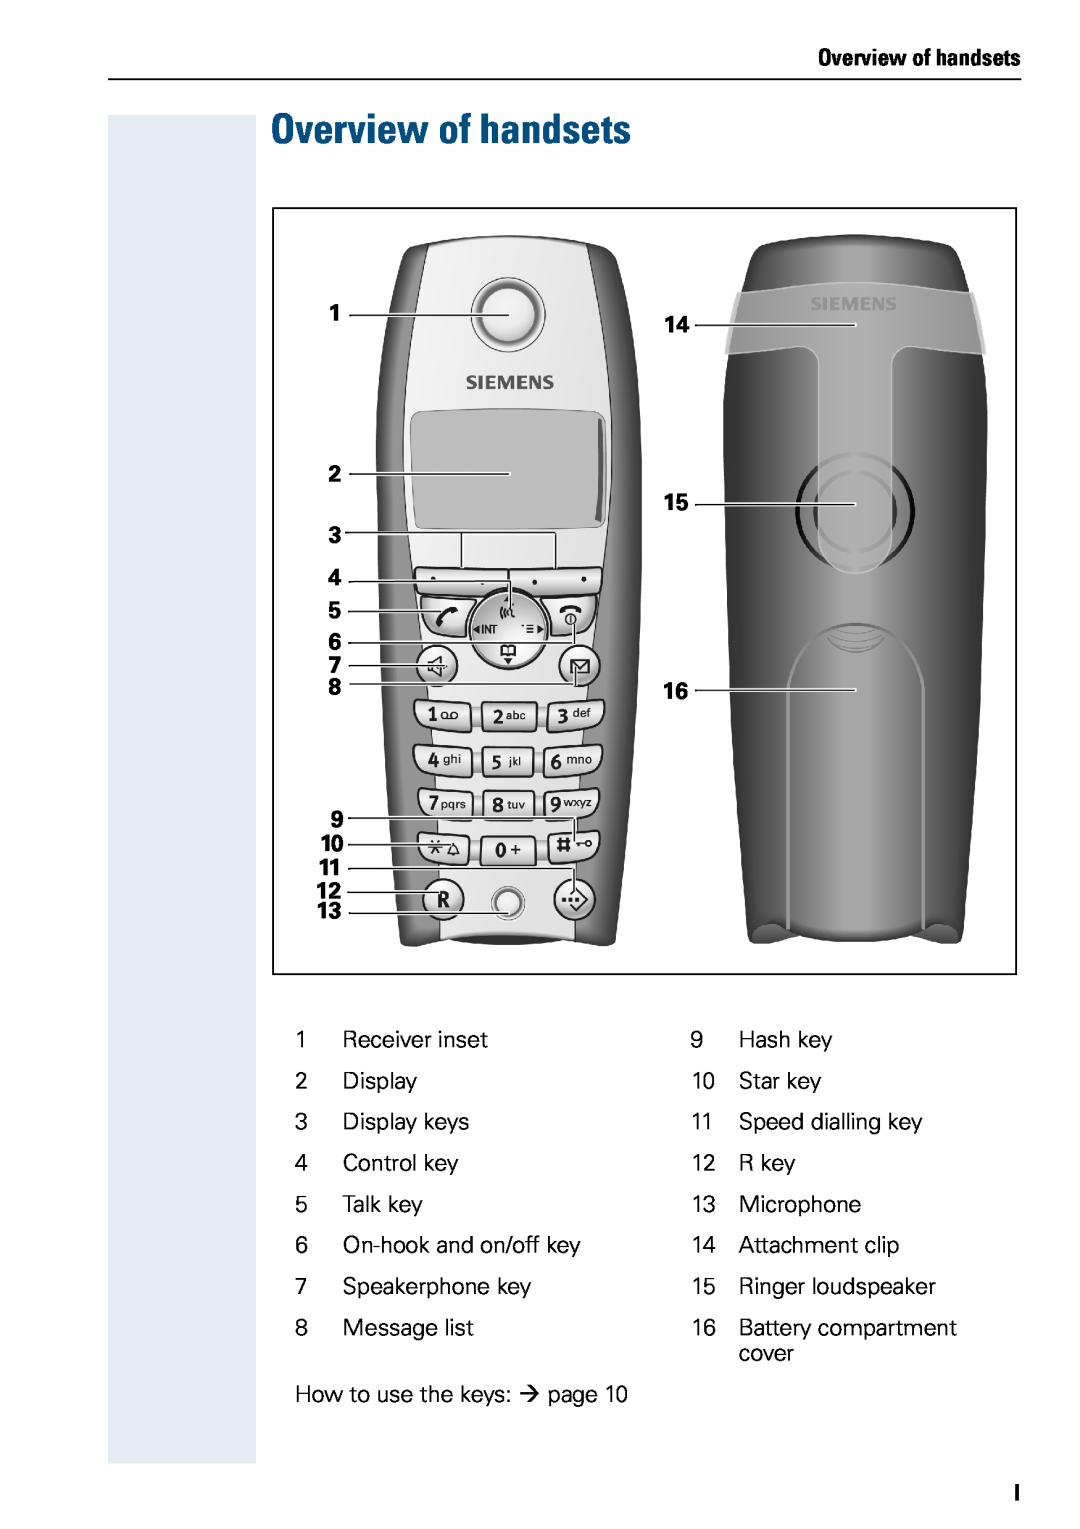 Siemens 500 manual Overview of handsets 